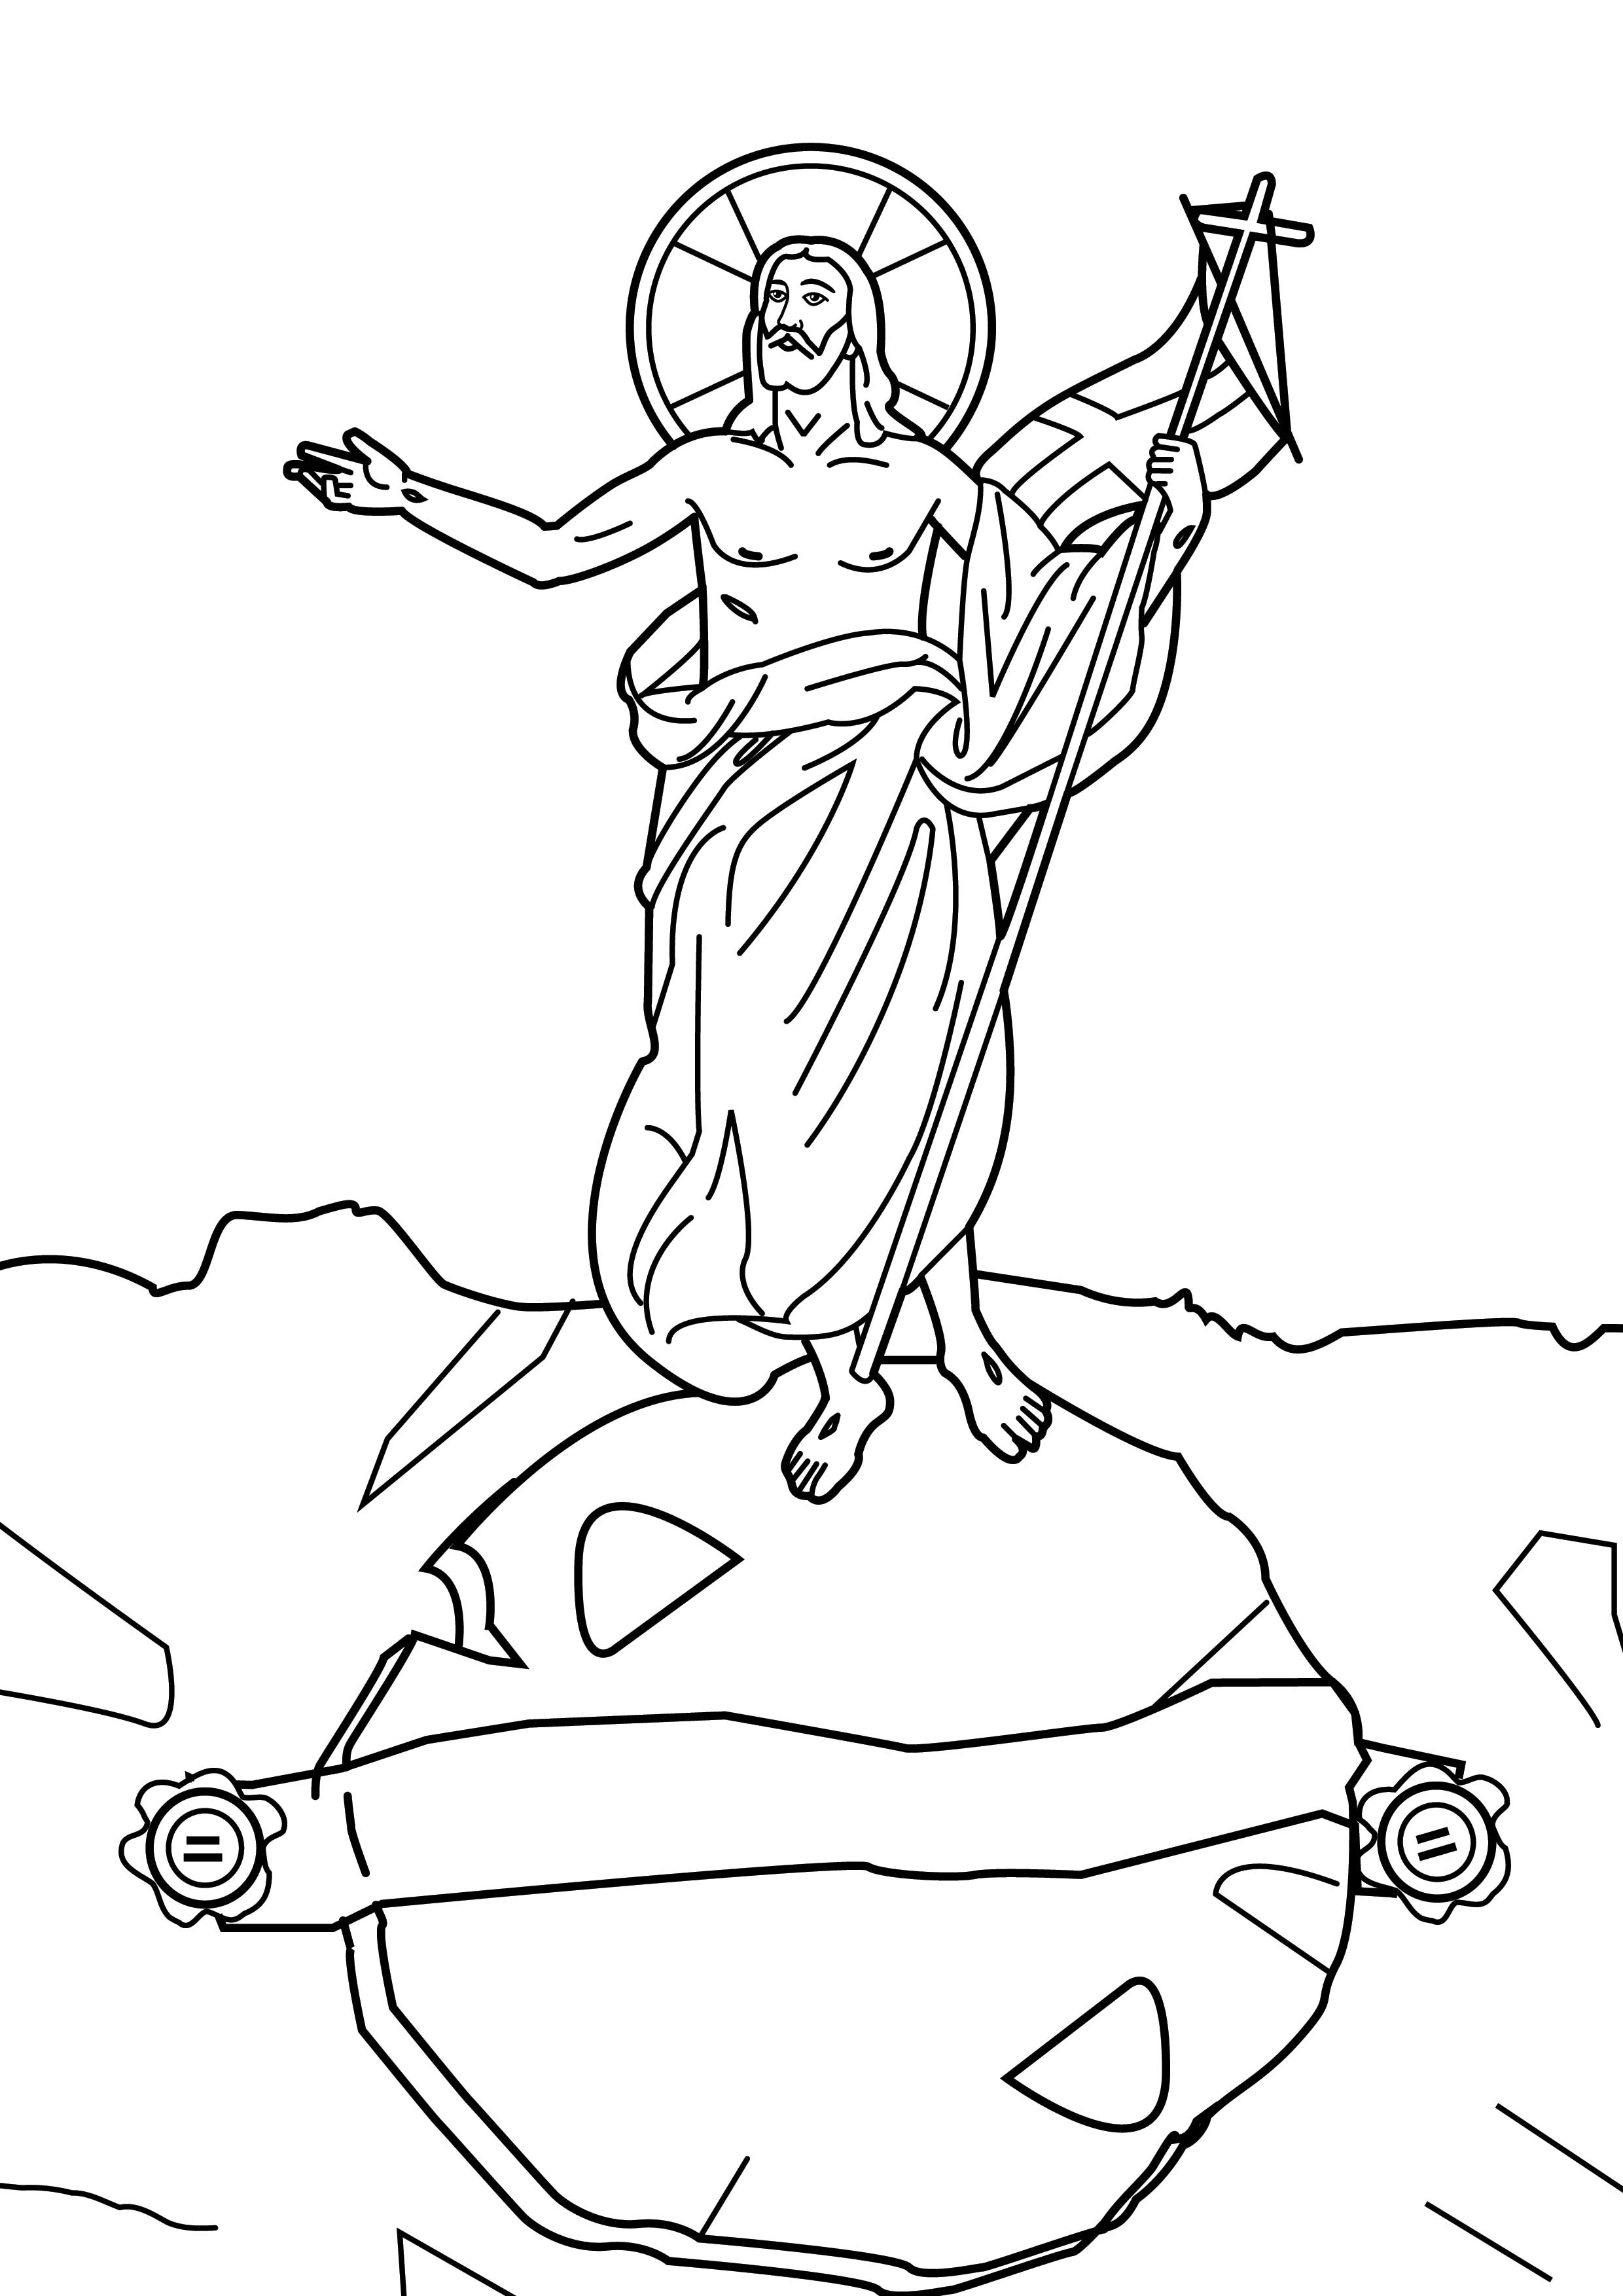 St-Takla.org Image: Coloring picture of Resurrection of the Lord Jesus Christ from the dead on the third day - Courtesy of "Encyclopedia of the Bible Coloring Images"     :             -  :     